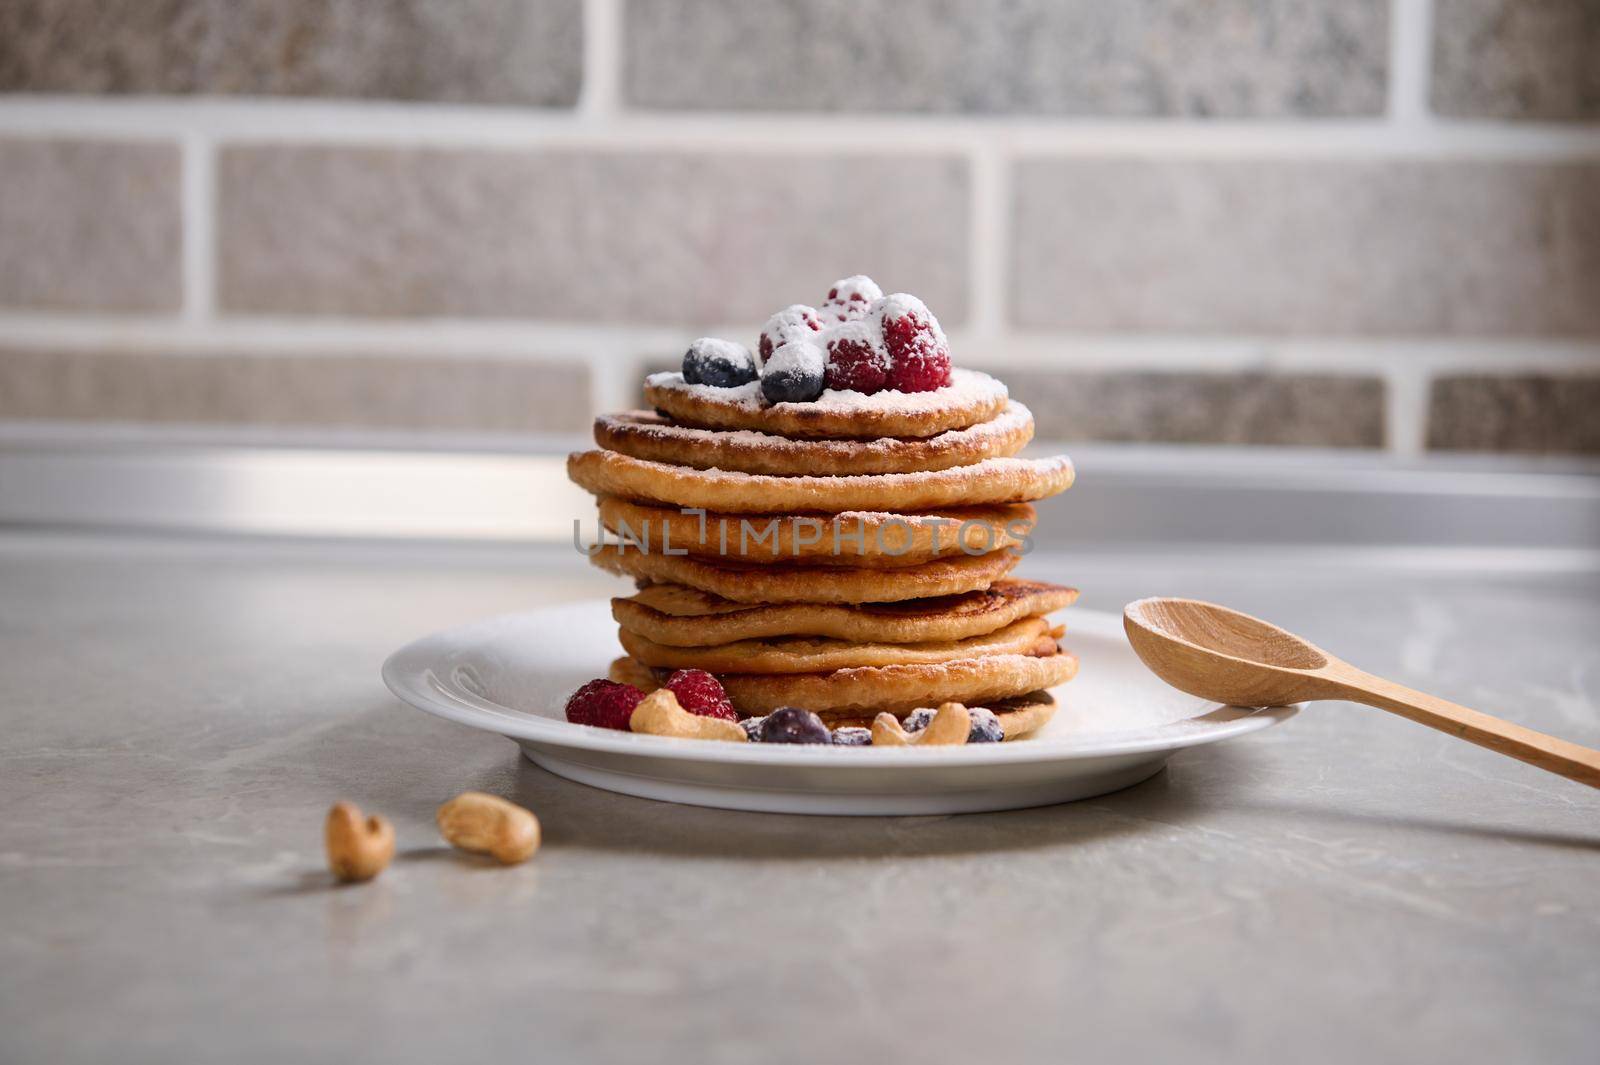 Stack of delicious homemade pancakes garnished with berries and cashew nuts, sprinkled with icing sugar on a white ceramic plate with wooden spoon on kitchen countertop. Shrove Tuesday concept by artgf